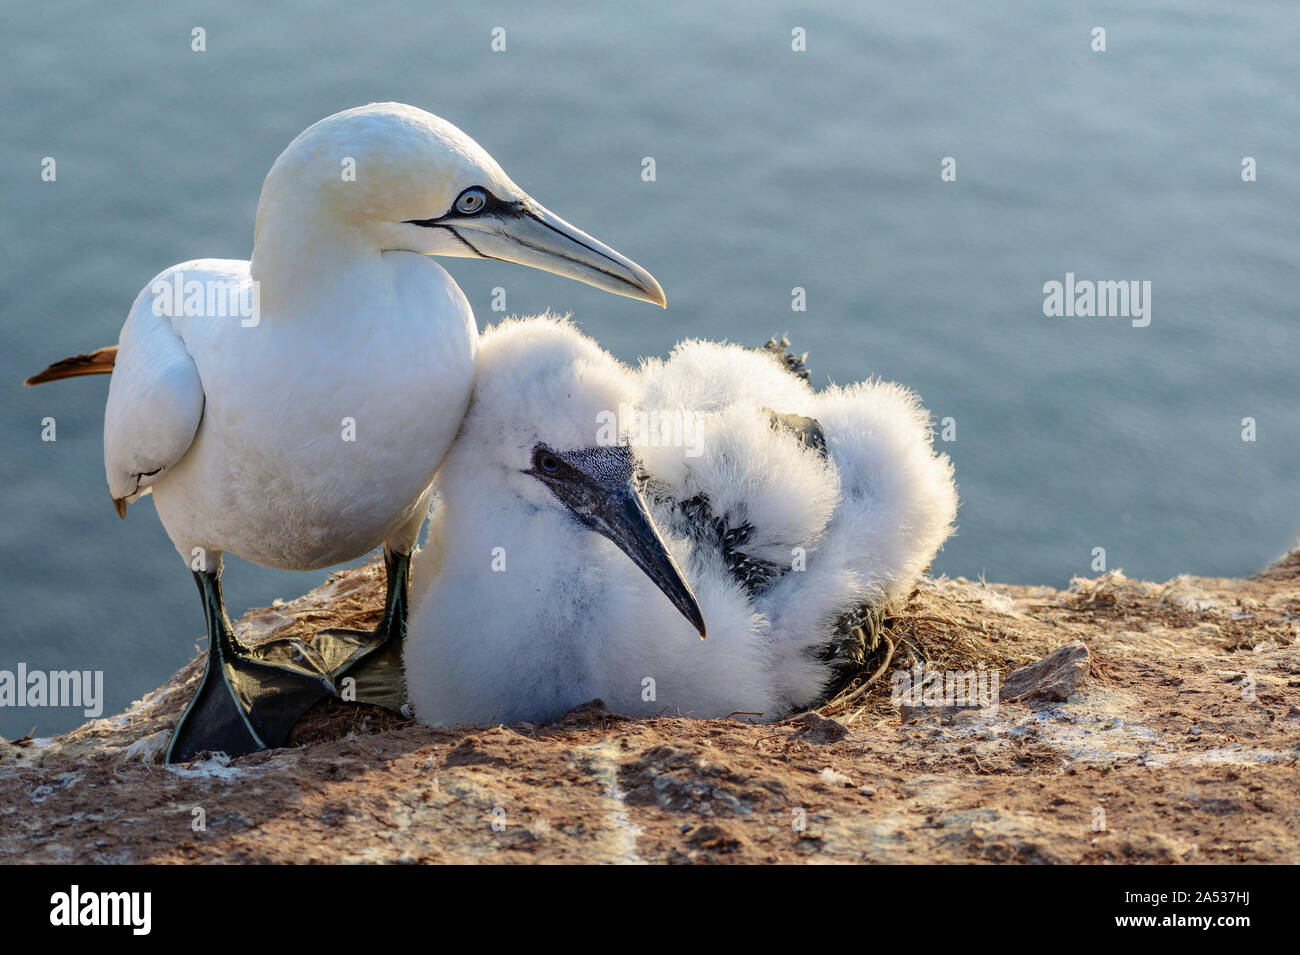 northern gannet (Morus bassanus) with a chick in fluffy feathers, the seabirds live on the rocks of the island Heligoland in the north sea, Germany, b Stock Photo